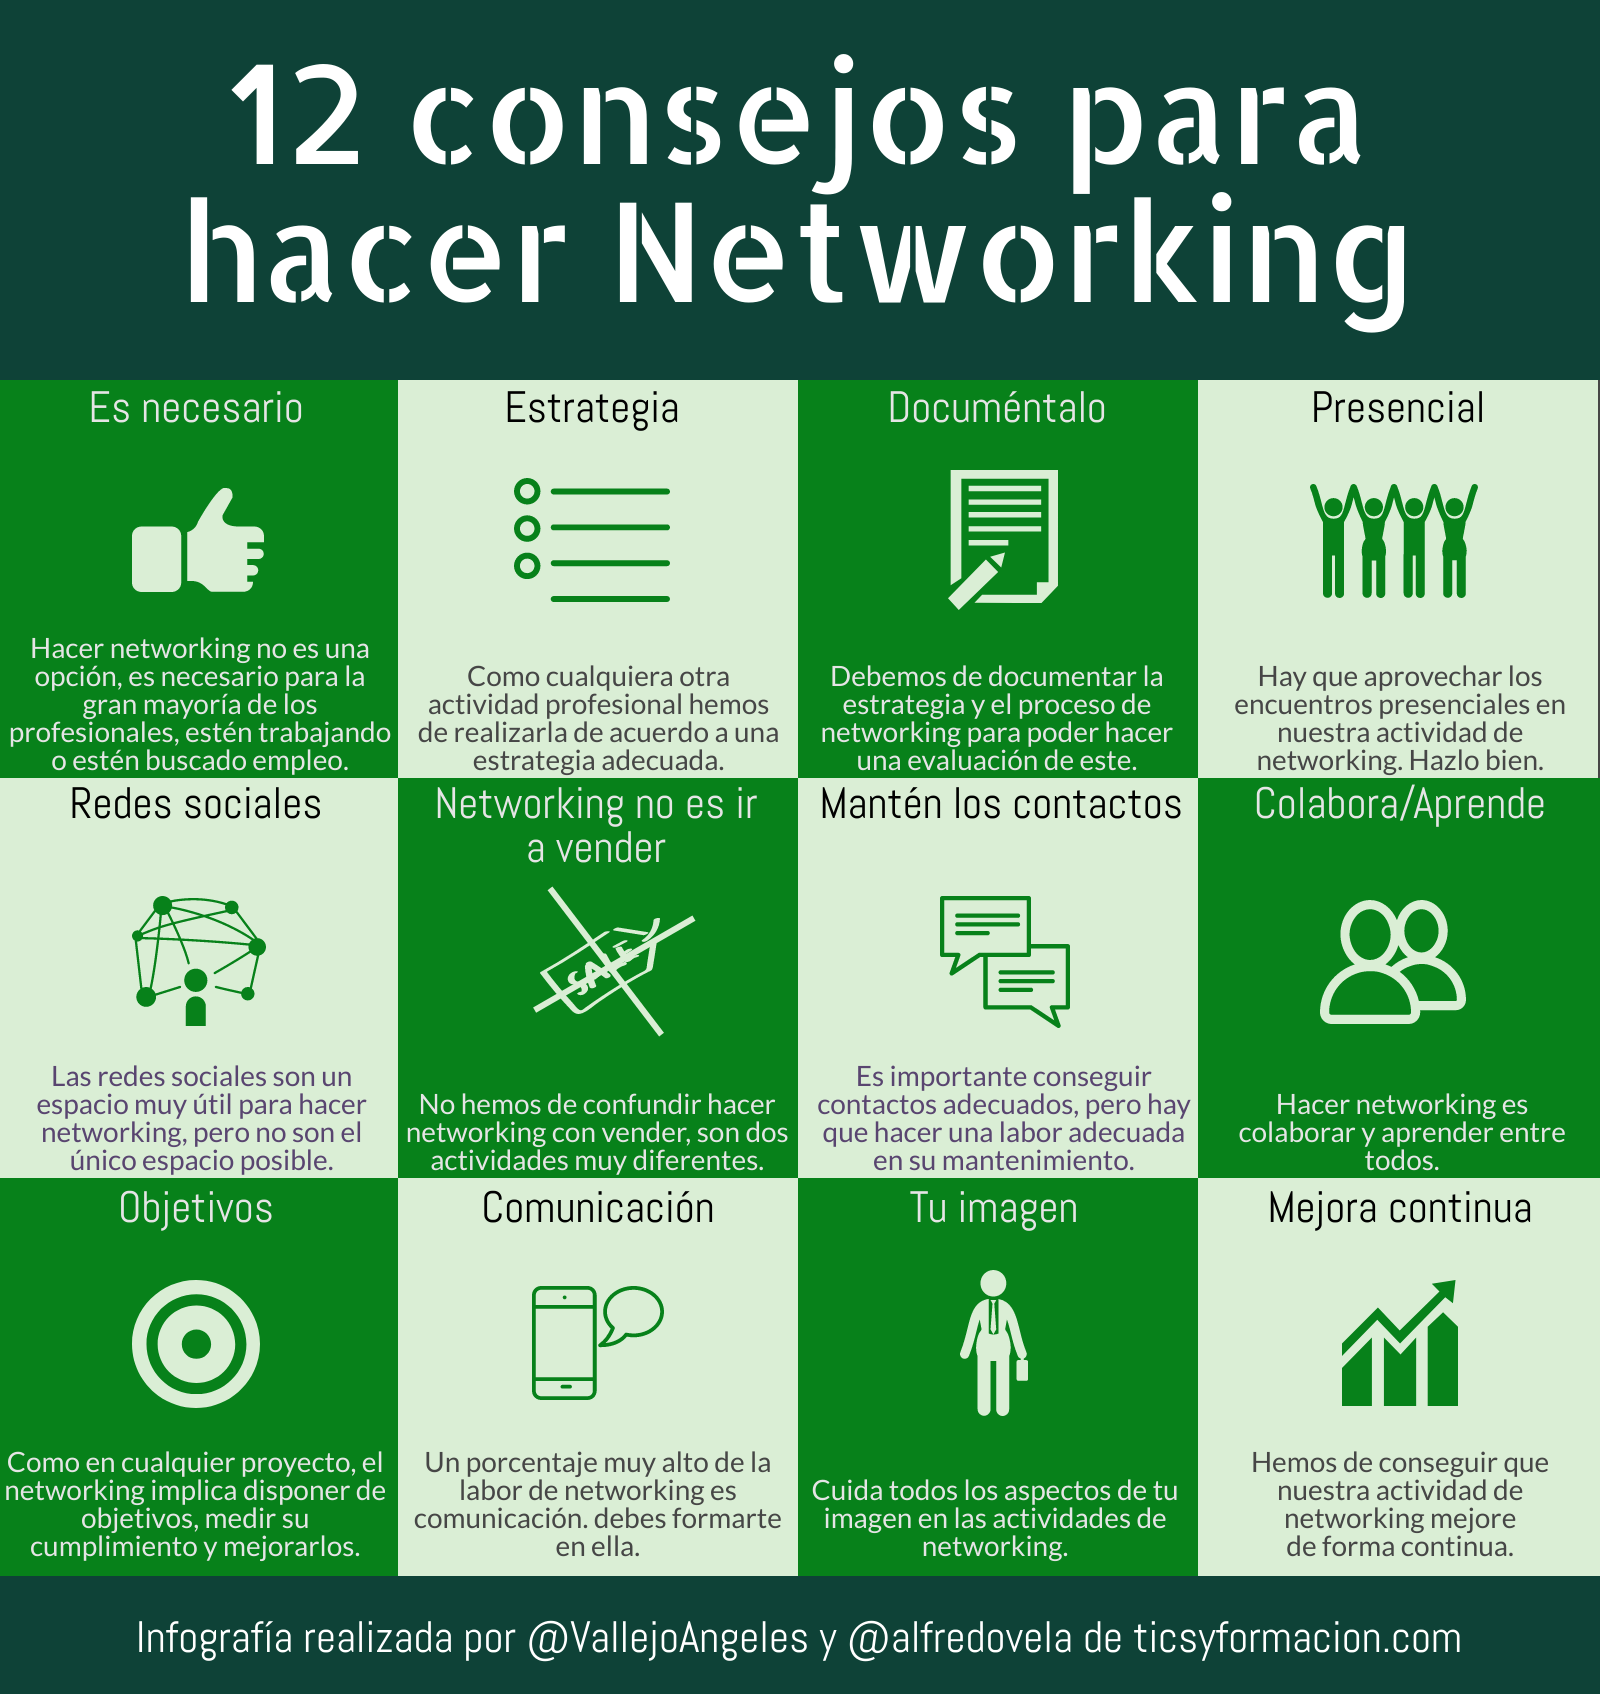 12 consejos para hacer Networking #infografia #marketing #networking